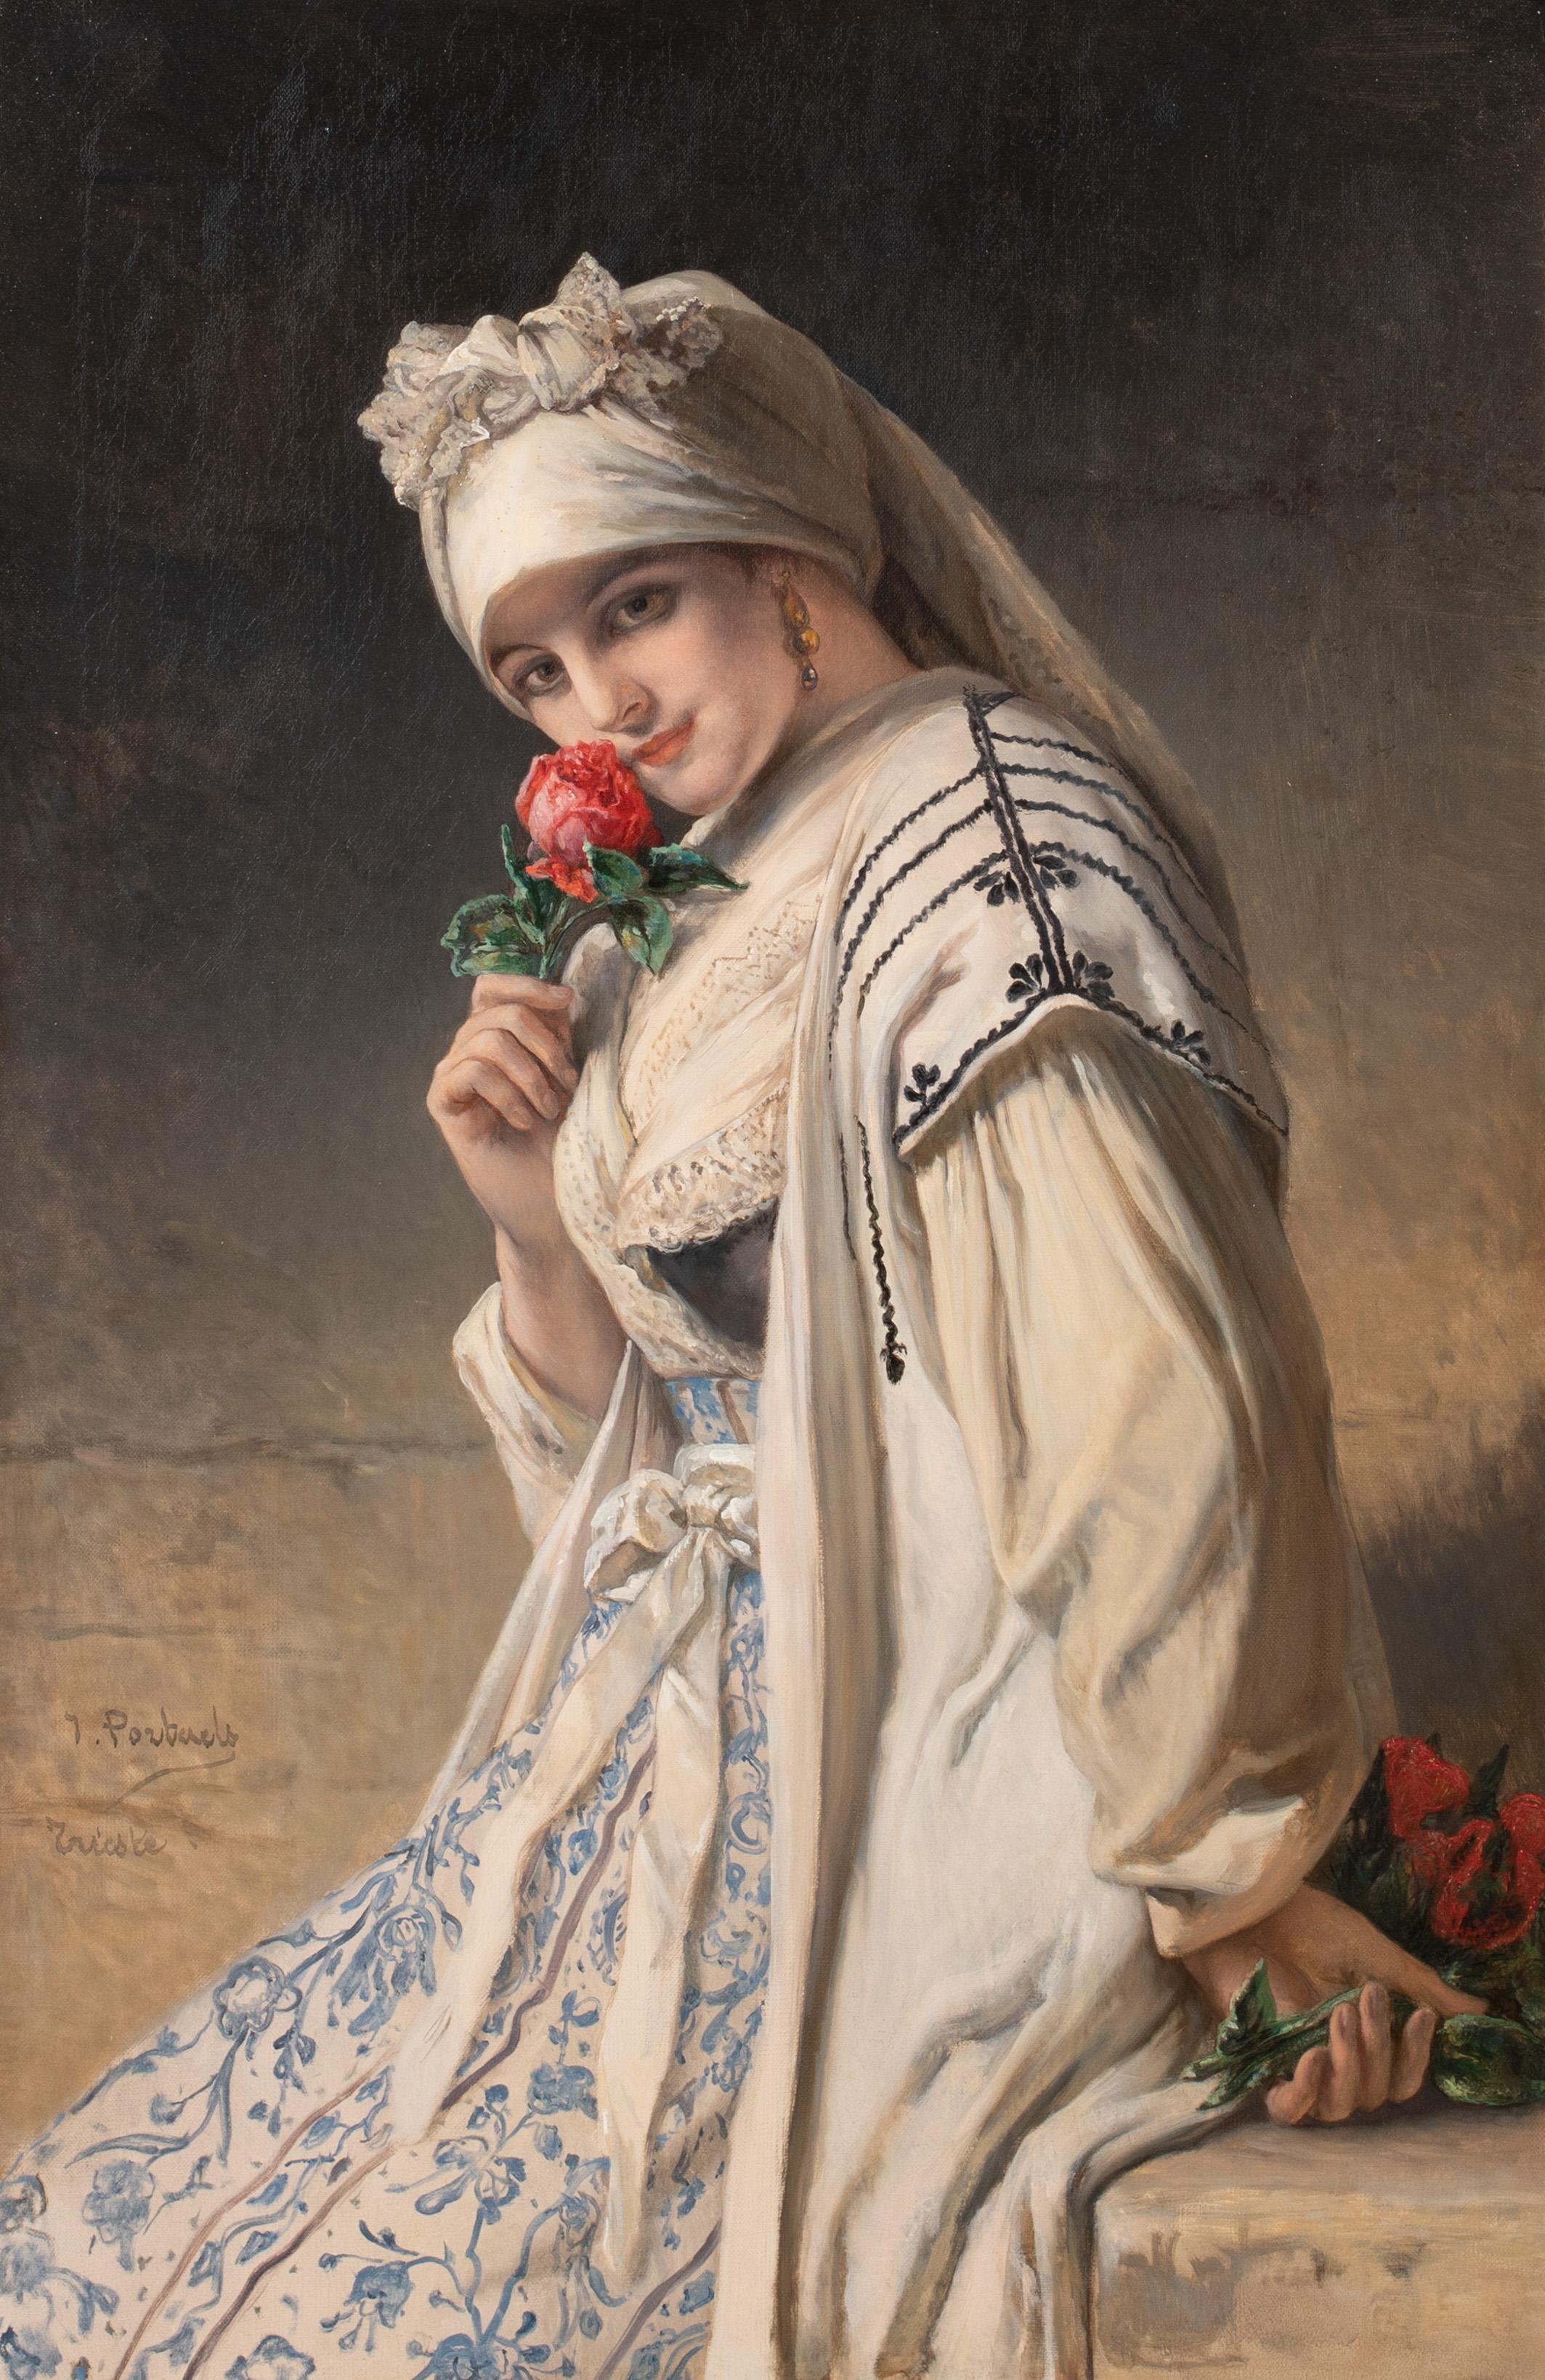 Jean-Fran�_ois Portaels Portrait Painting - The Fragrance Of The Rose, 19th century by Jean Francois Portaels, (1818-1895)